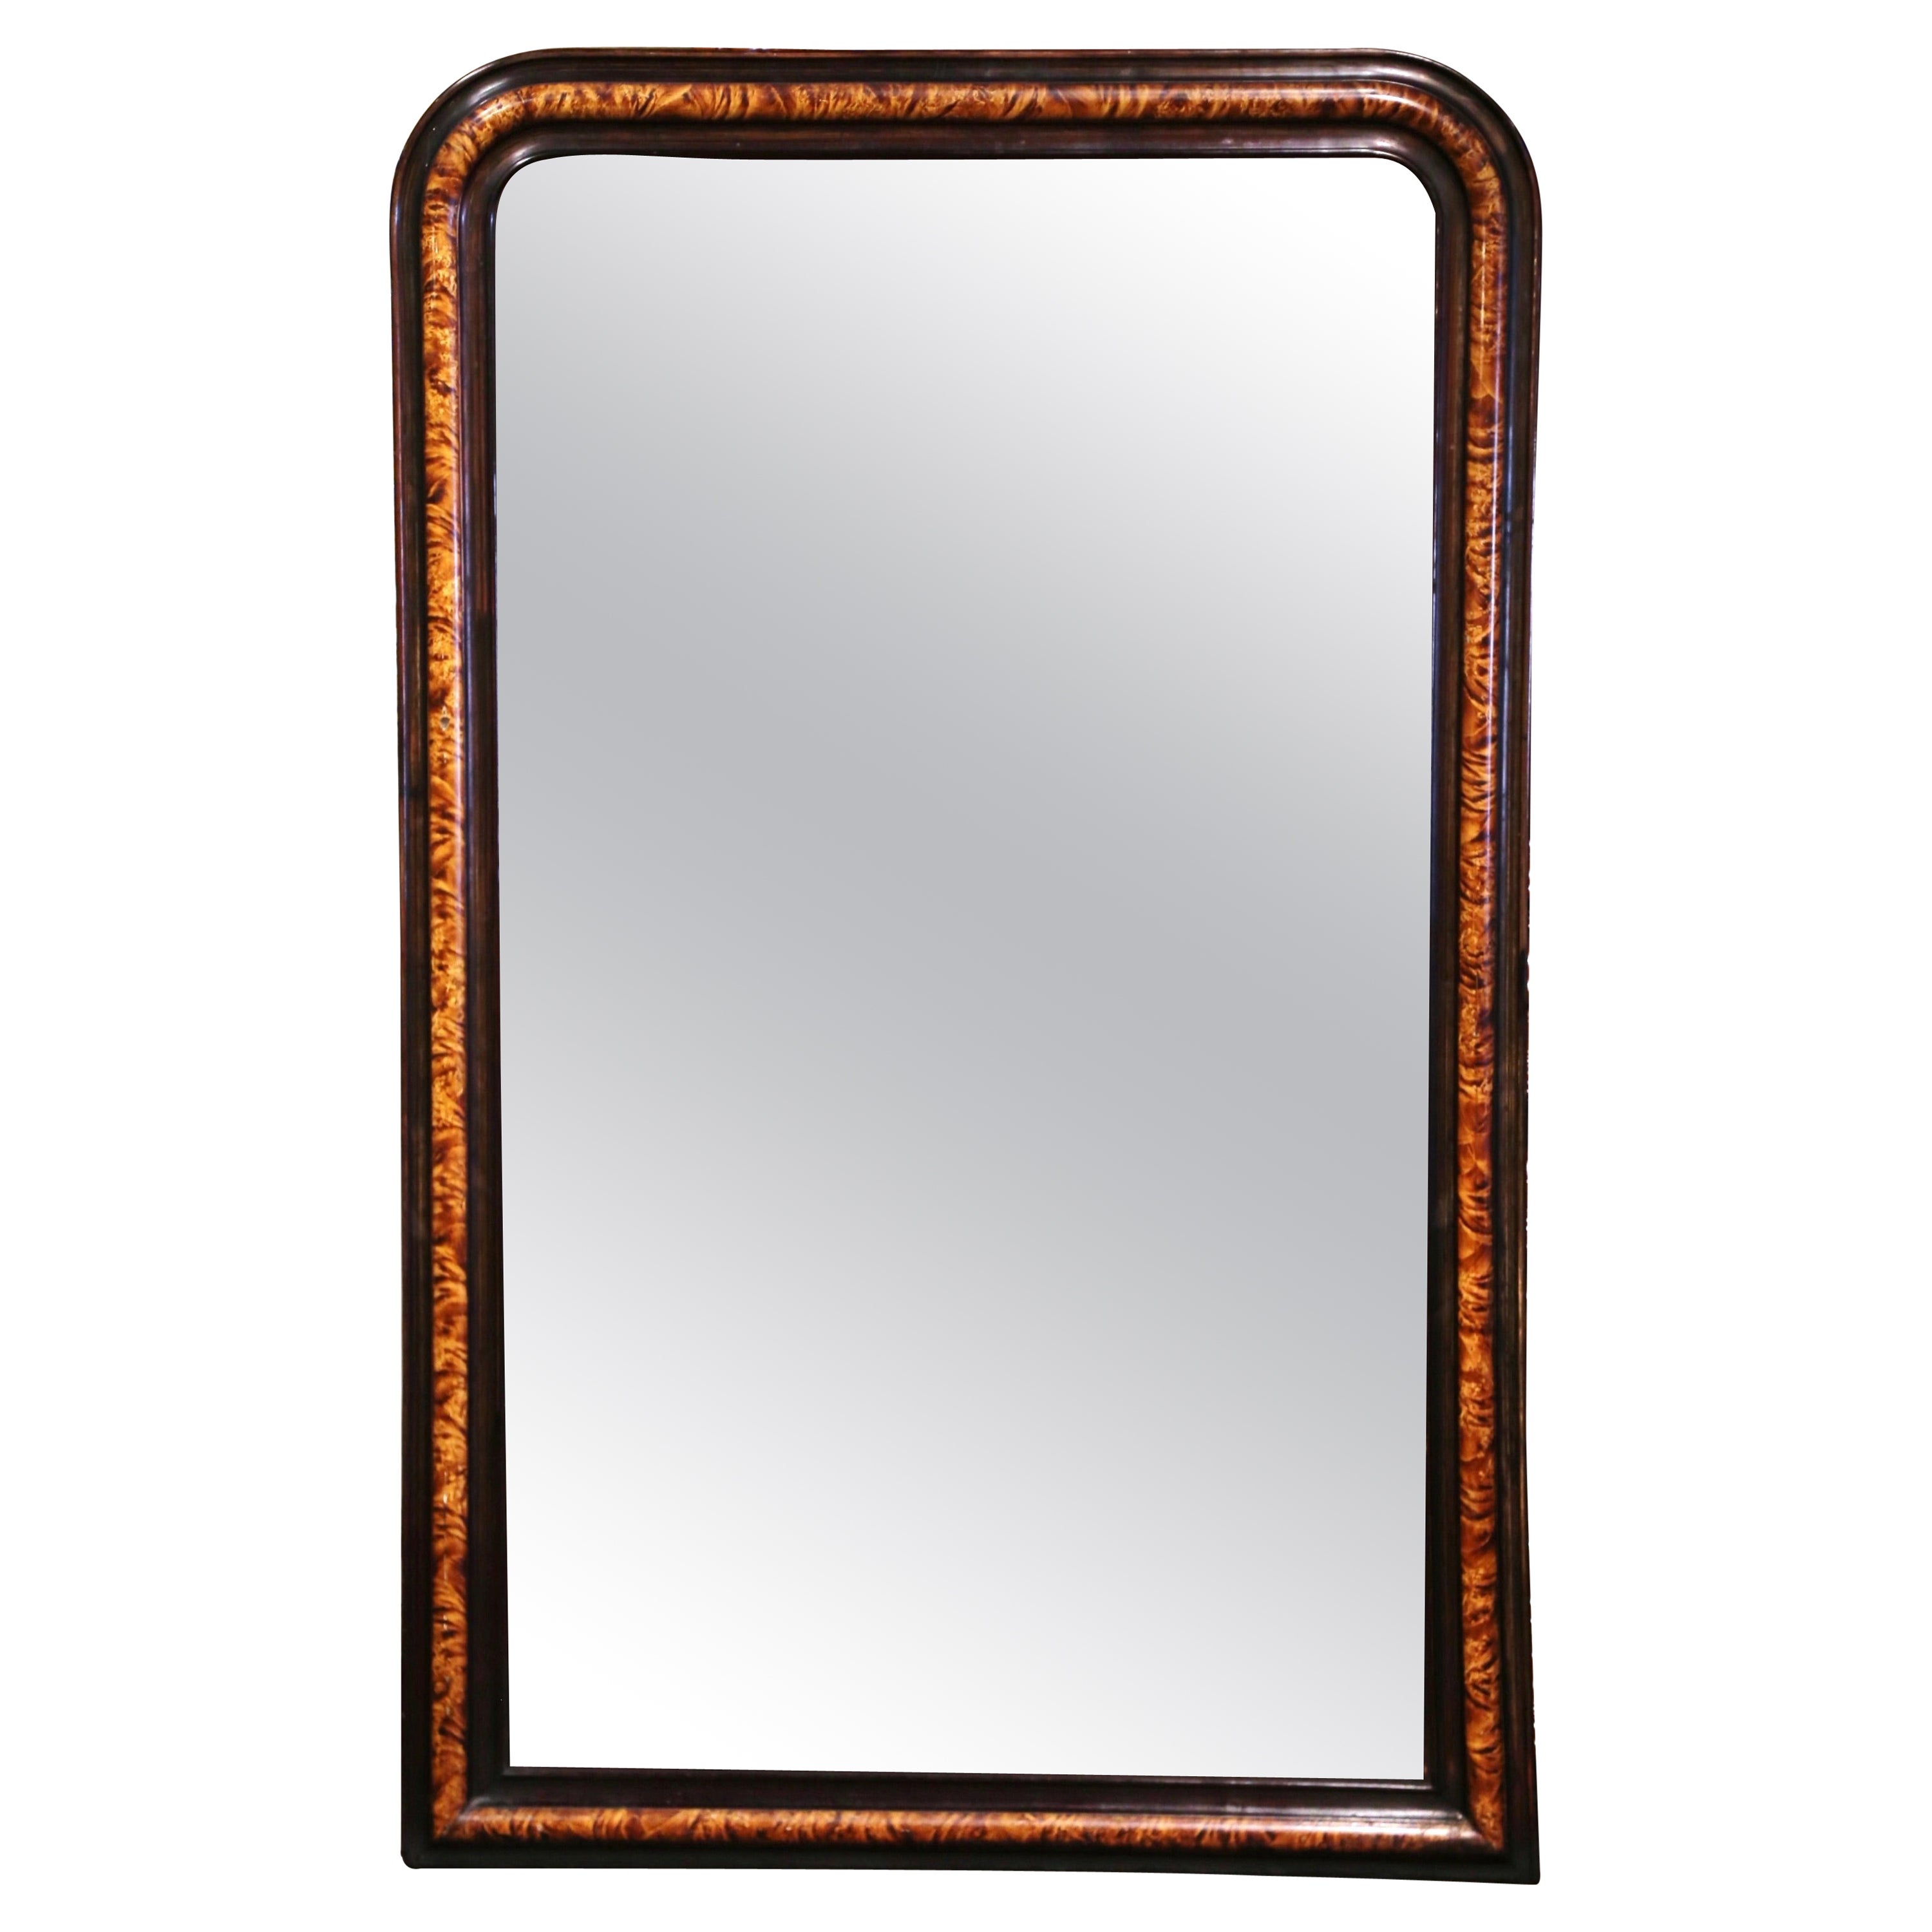 19th Century Louis Philippe Two-Tone Faux Burl Wood Wall Mirror